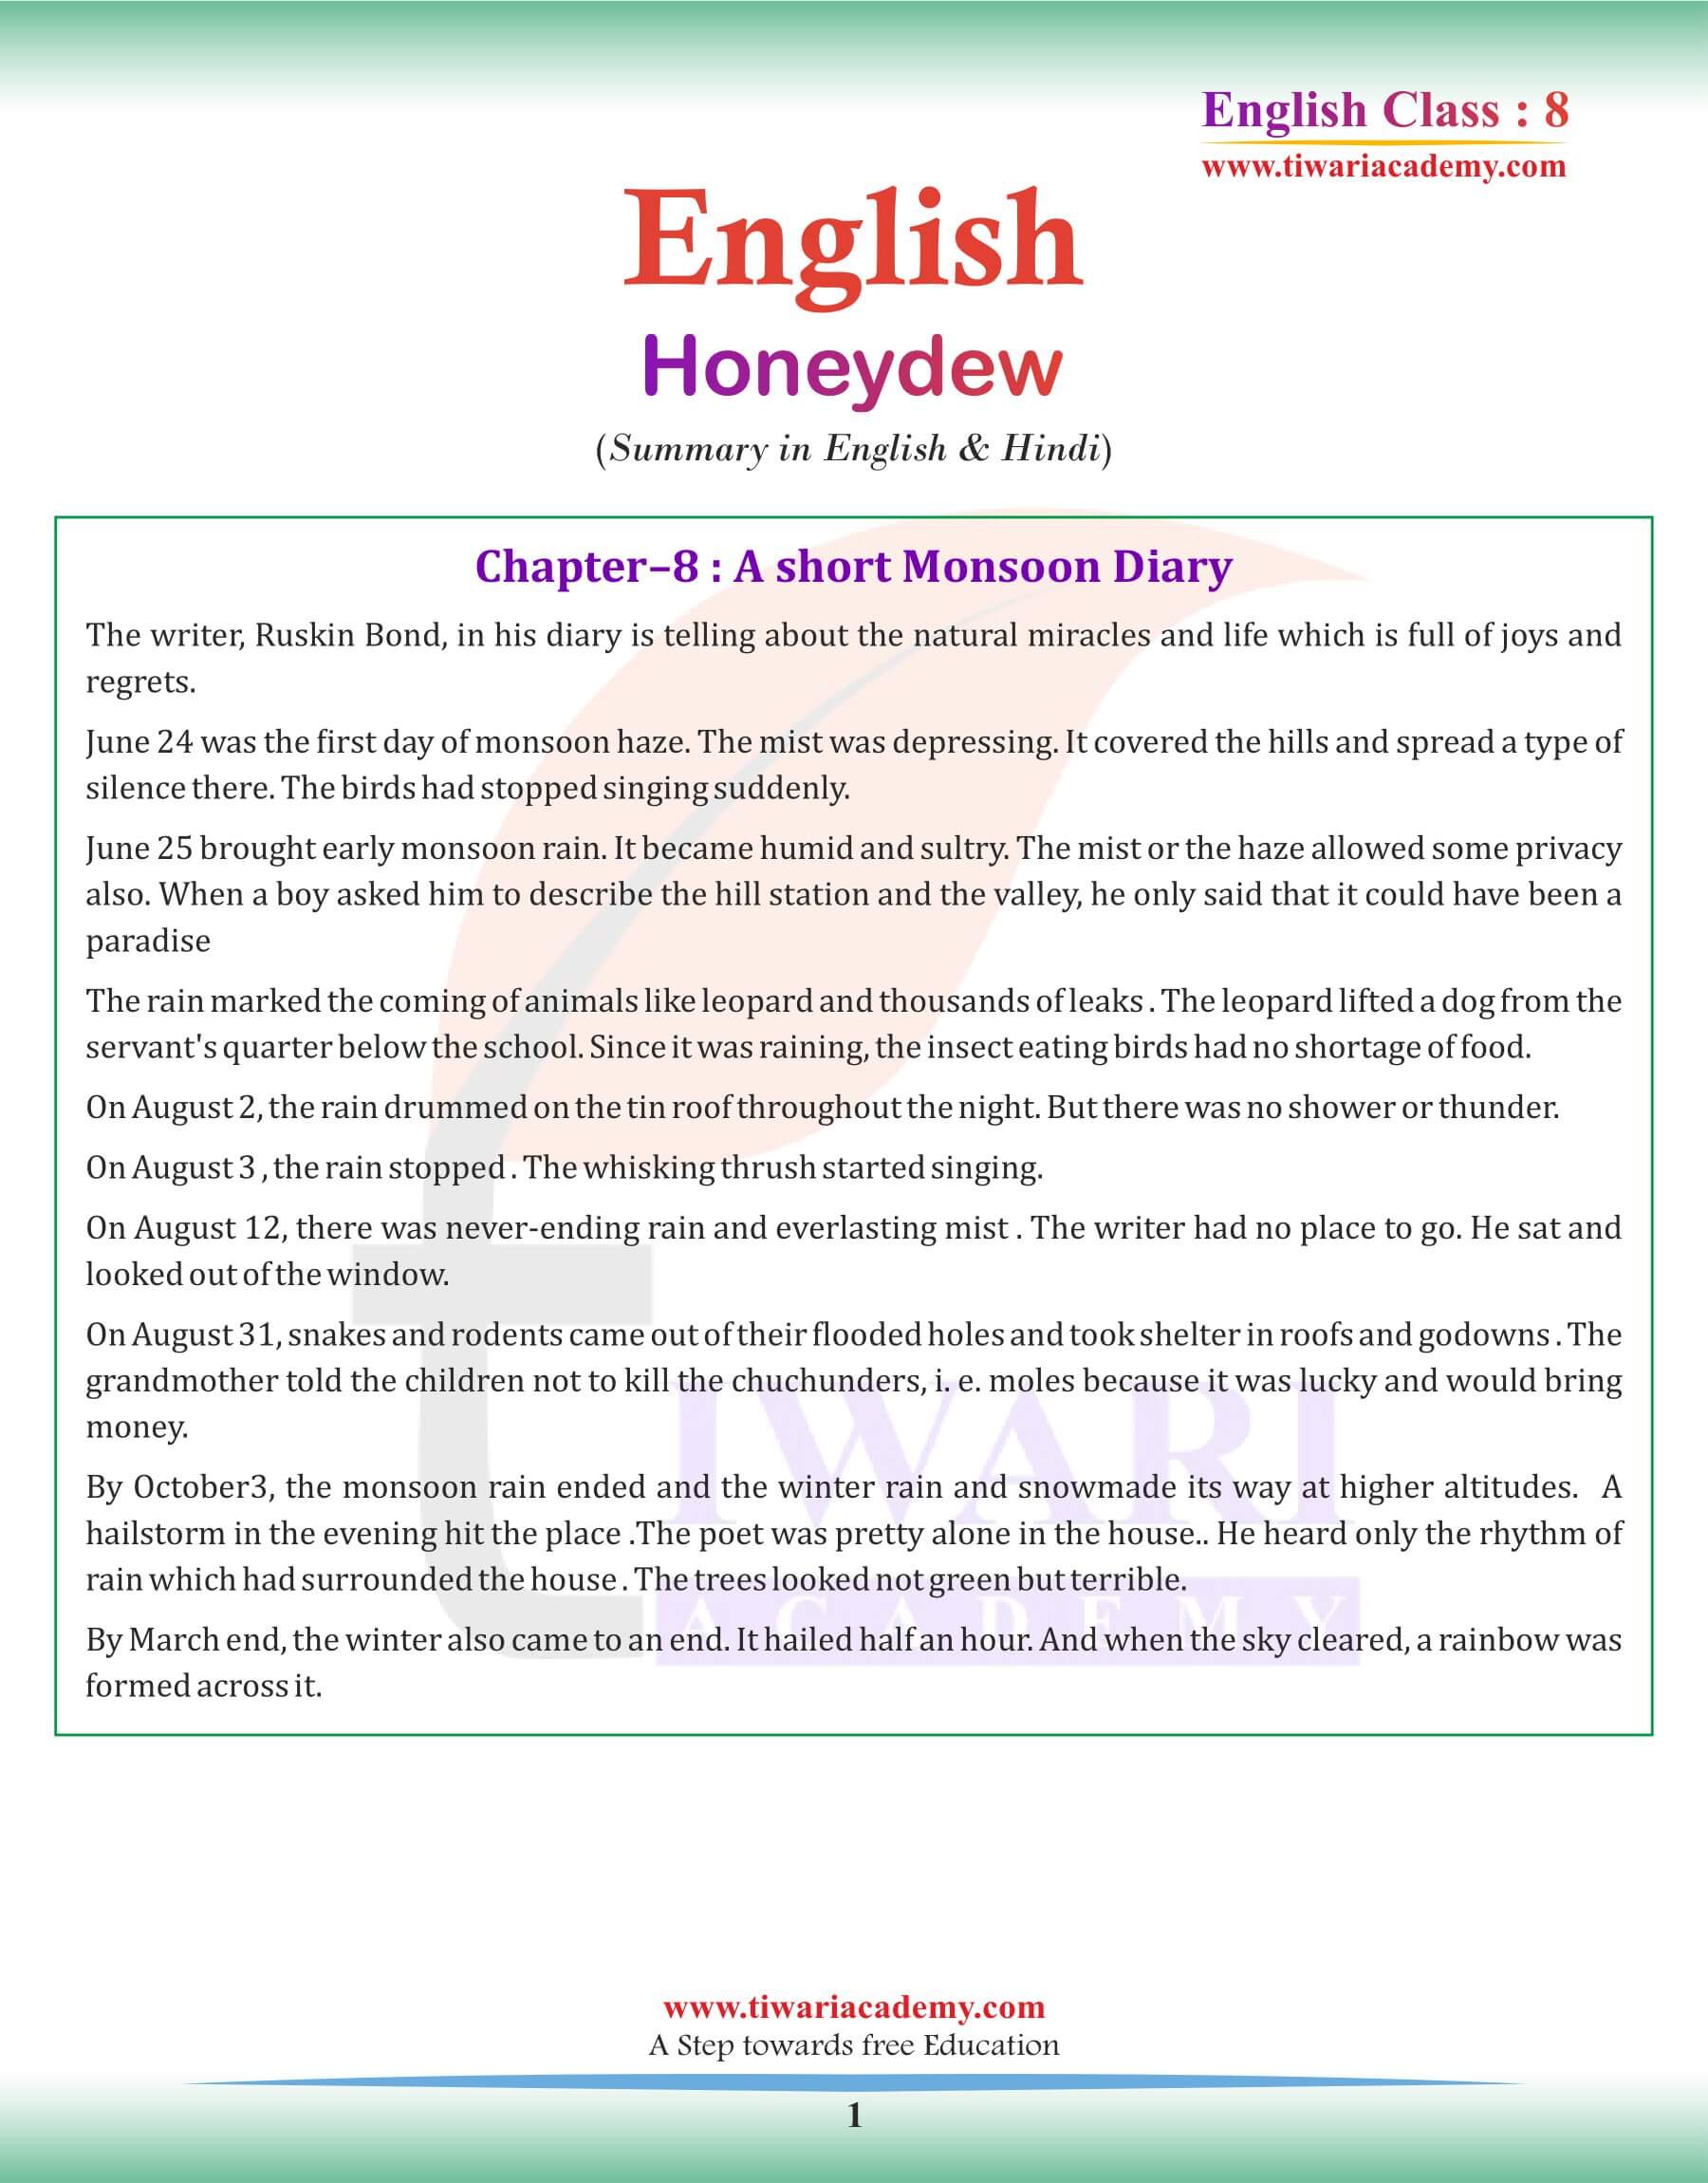 Class 8 English Chapter 8 Summary in English